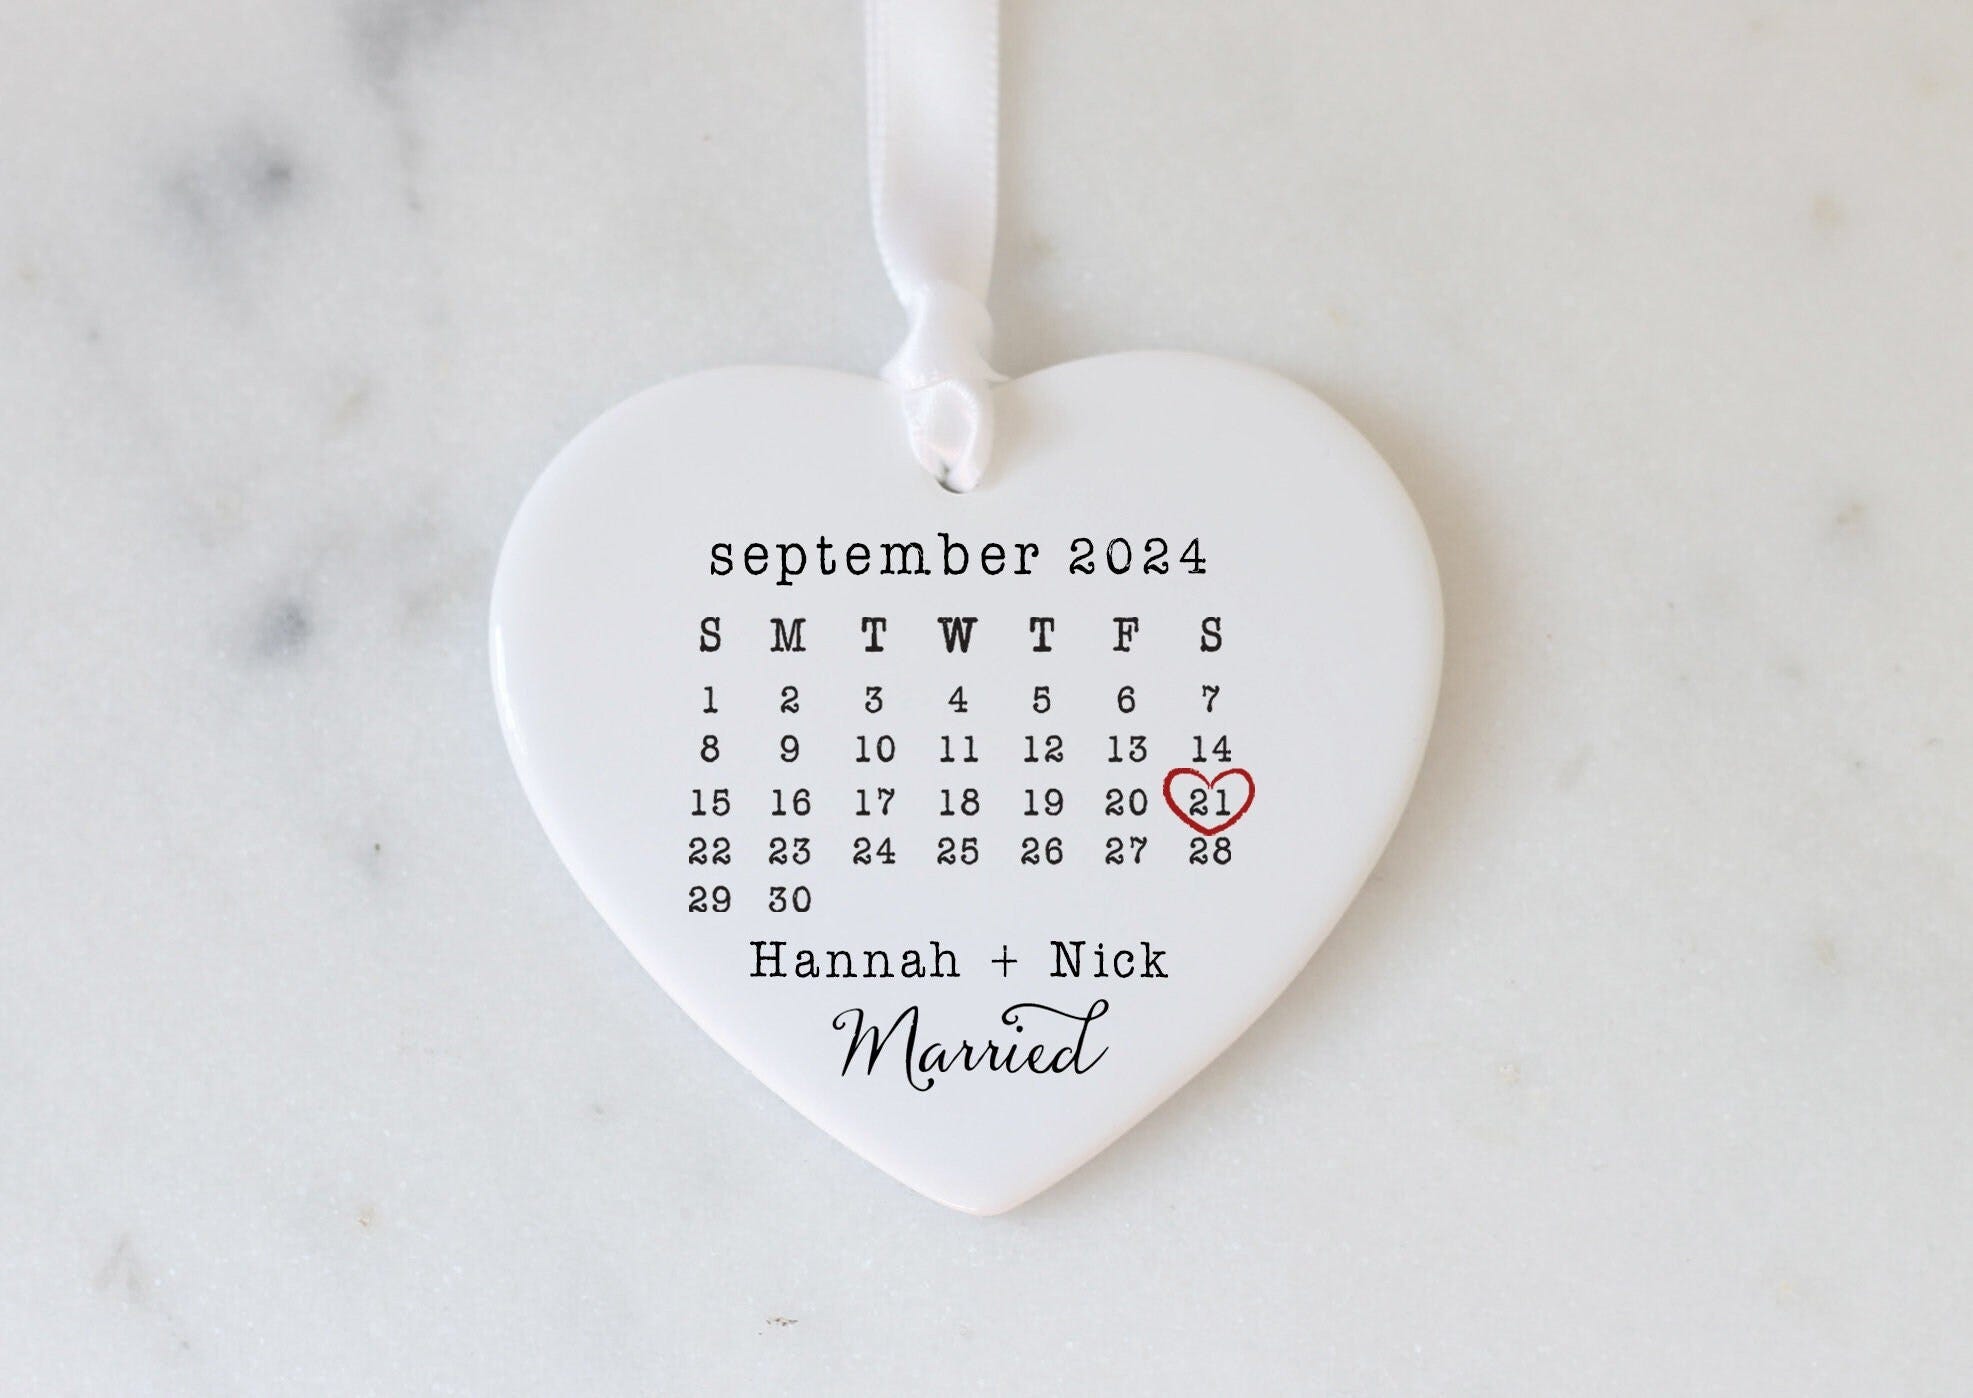 Married Ornament ~ Wedding Gift ~ Wedding Date ornament ~ Calendar Anniversary Gift ~ Our First Christmas ~ Newlywed Gift ~ Engagement Gift